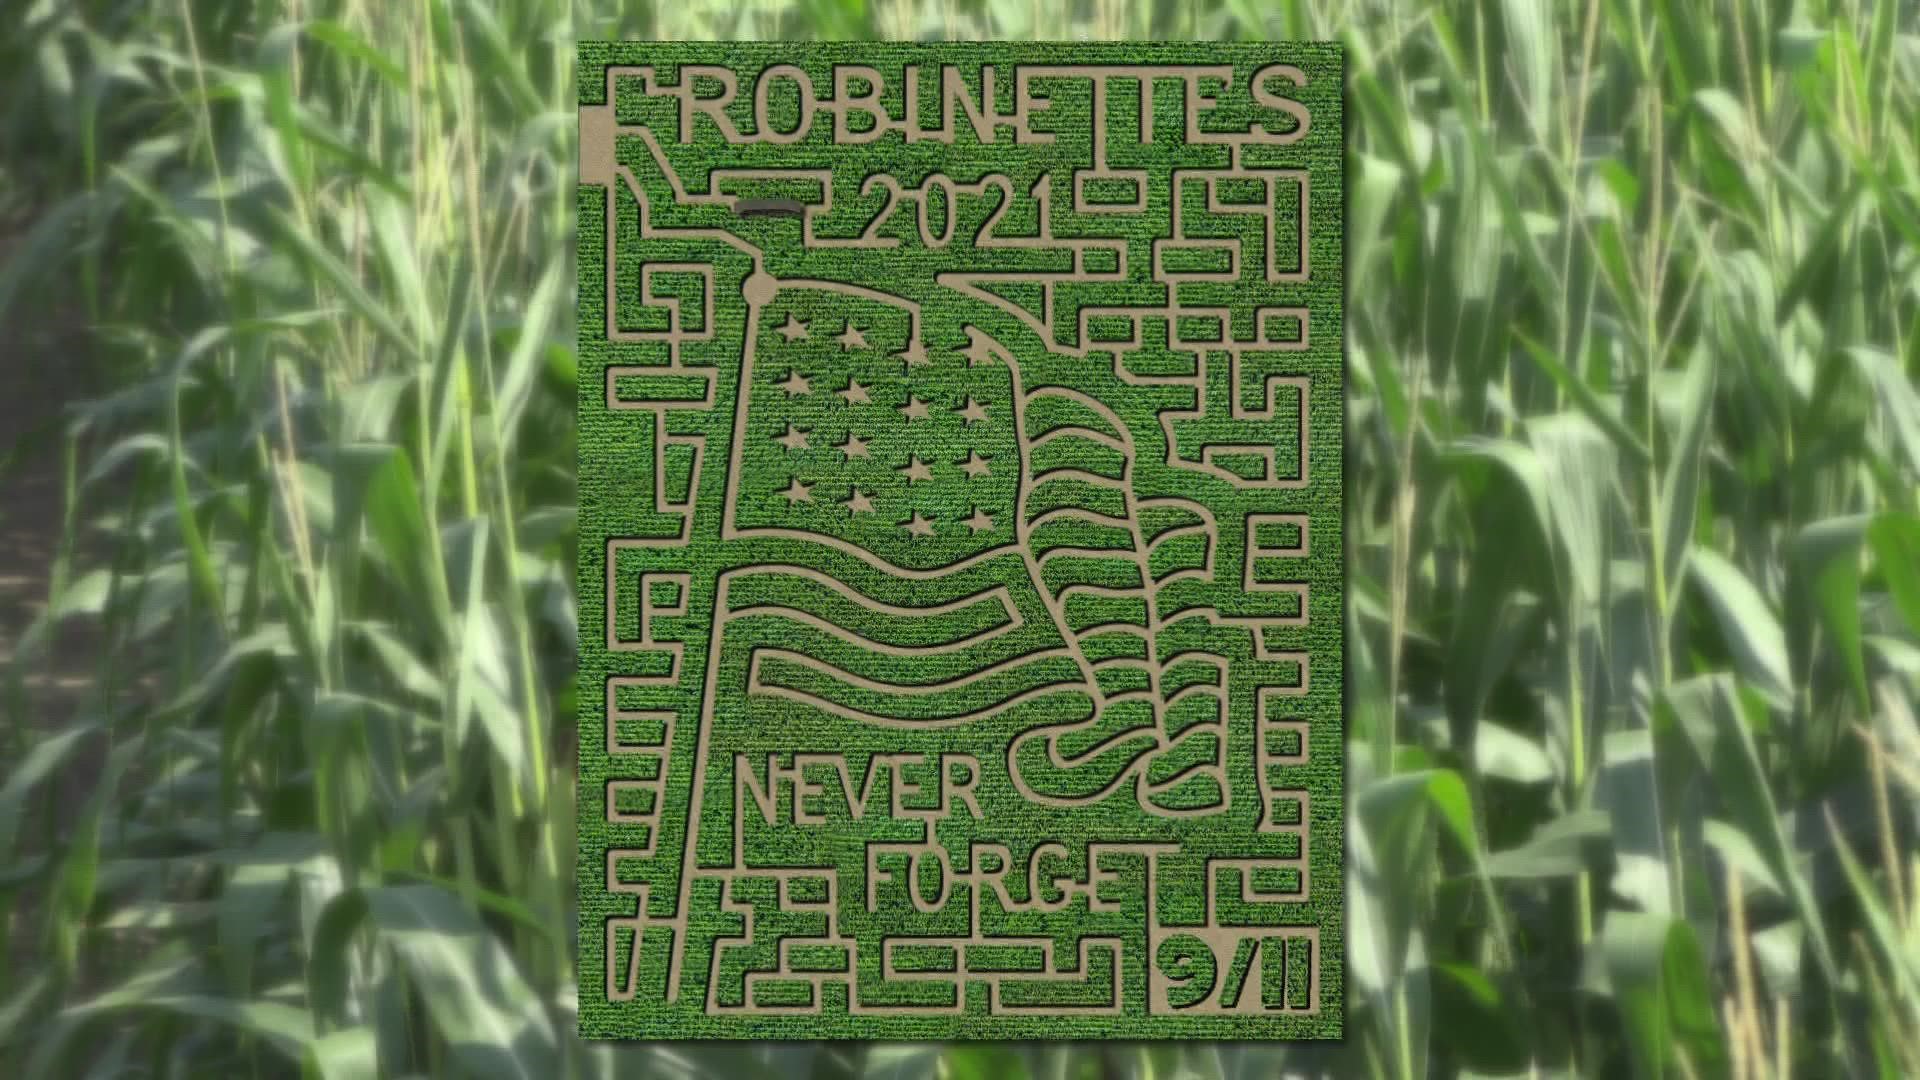 It's a sure sign that fall is nearly here: Robinette's Apple Haus & Winery is preparing their corn maze to visitors.